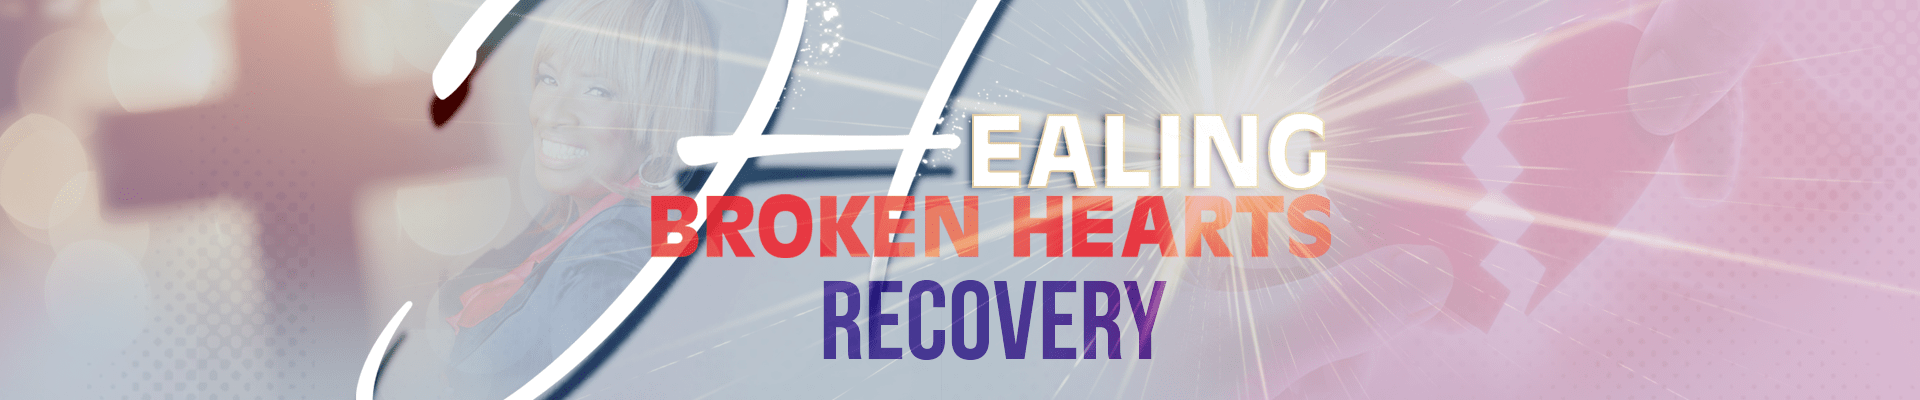 Healing Broken Hearts Recovery Saturday arch 14 @ 4:00PM @ Miraculous Foundation Christian Center Church 1642 Fruitvale Avenue. Oakland CA 94601